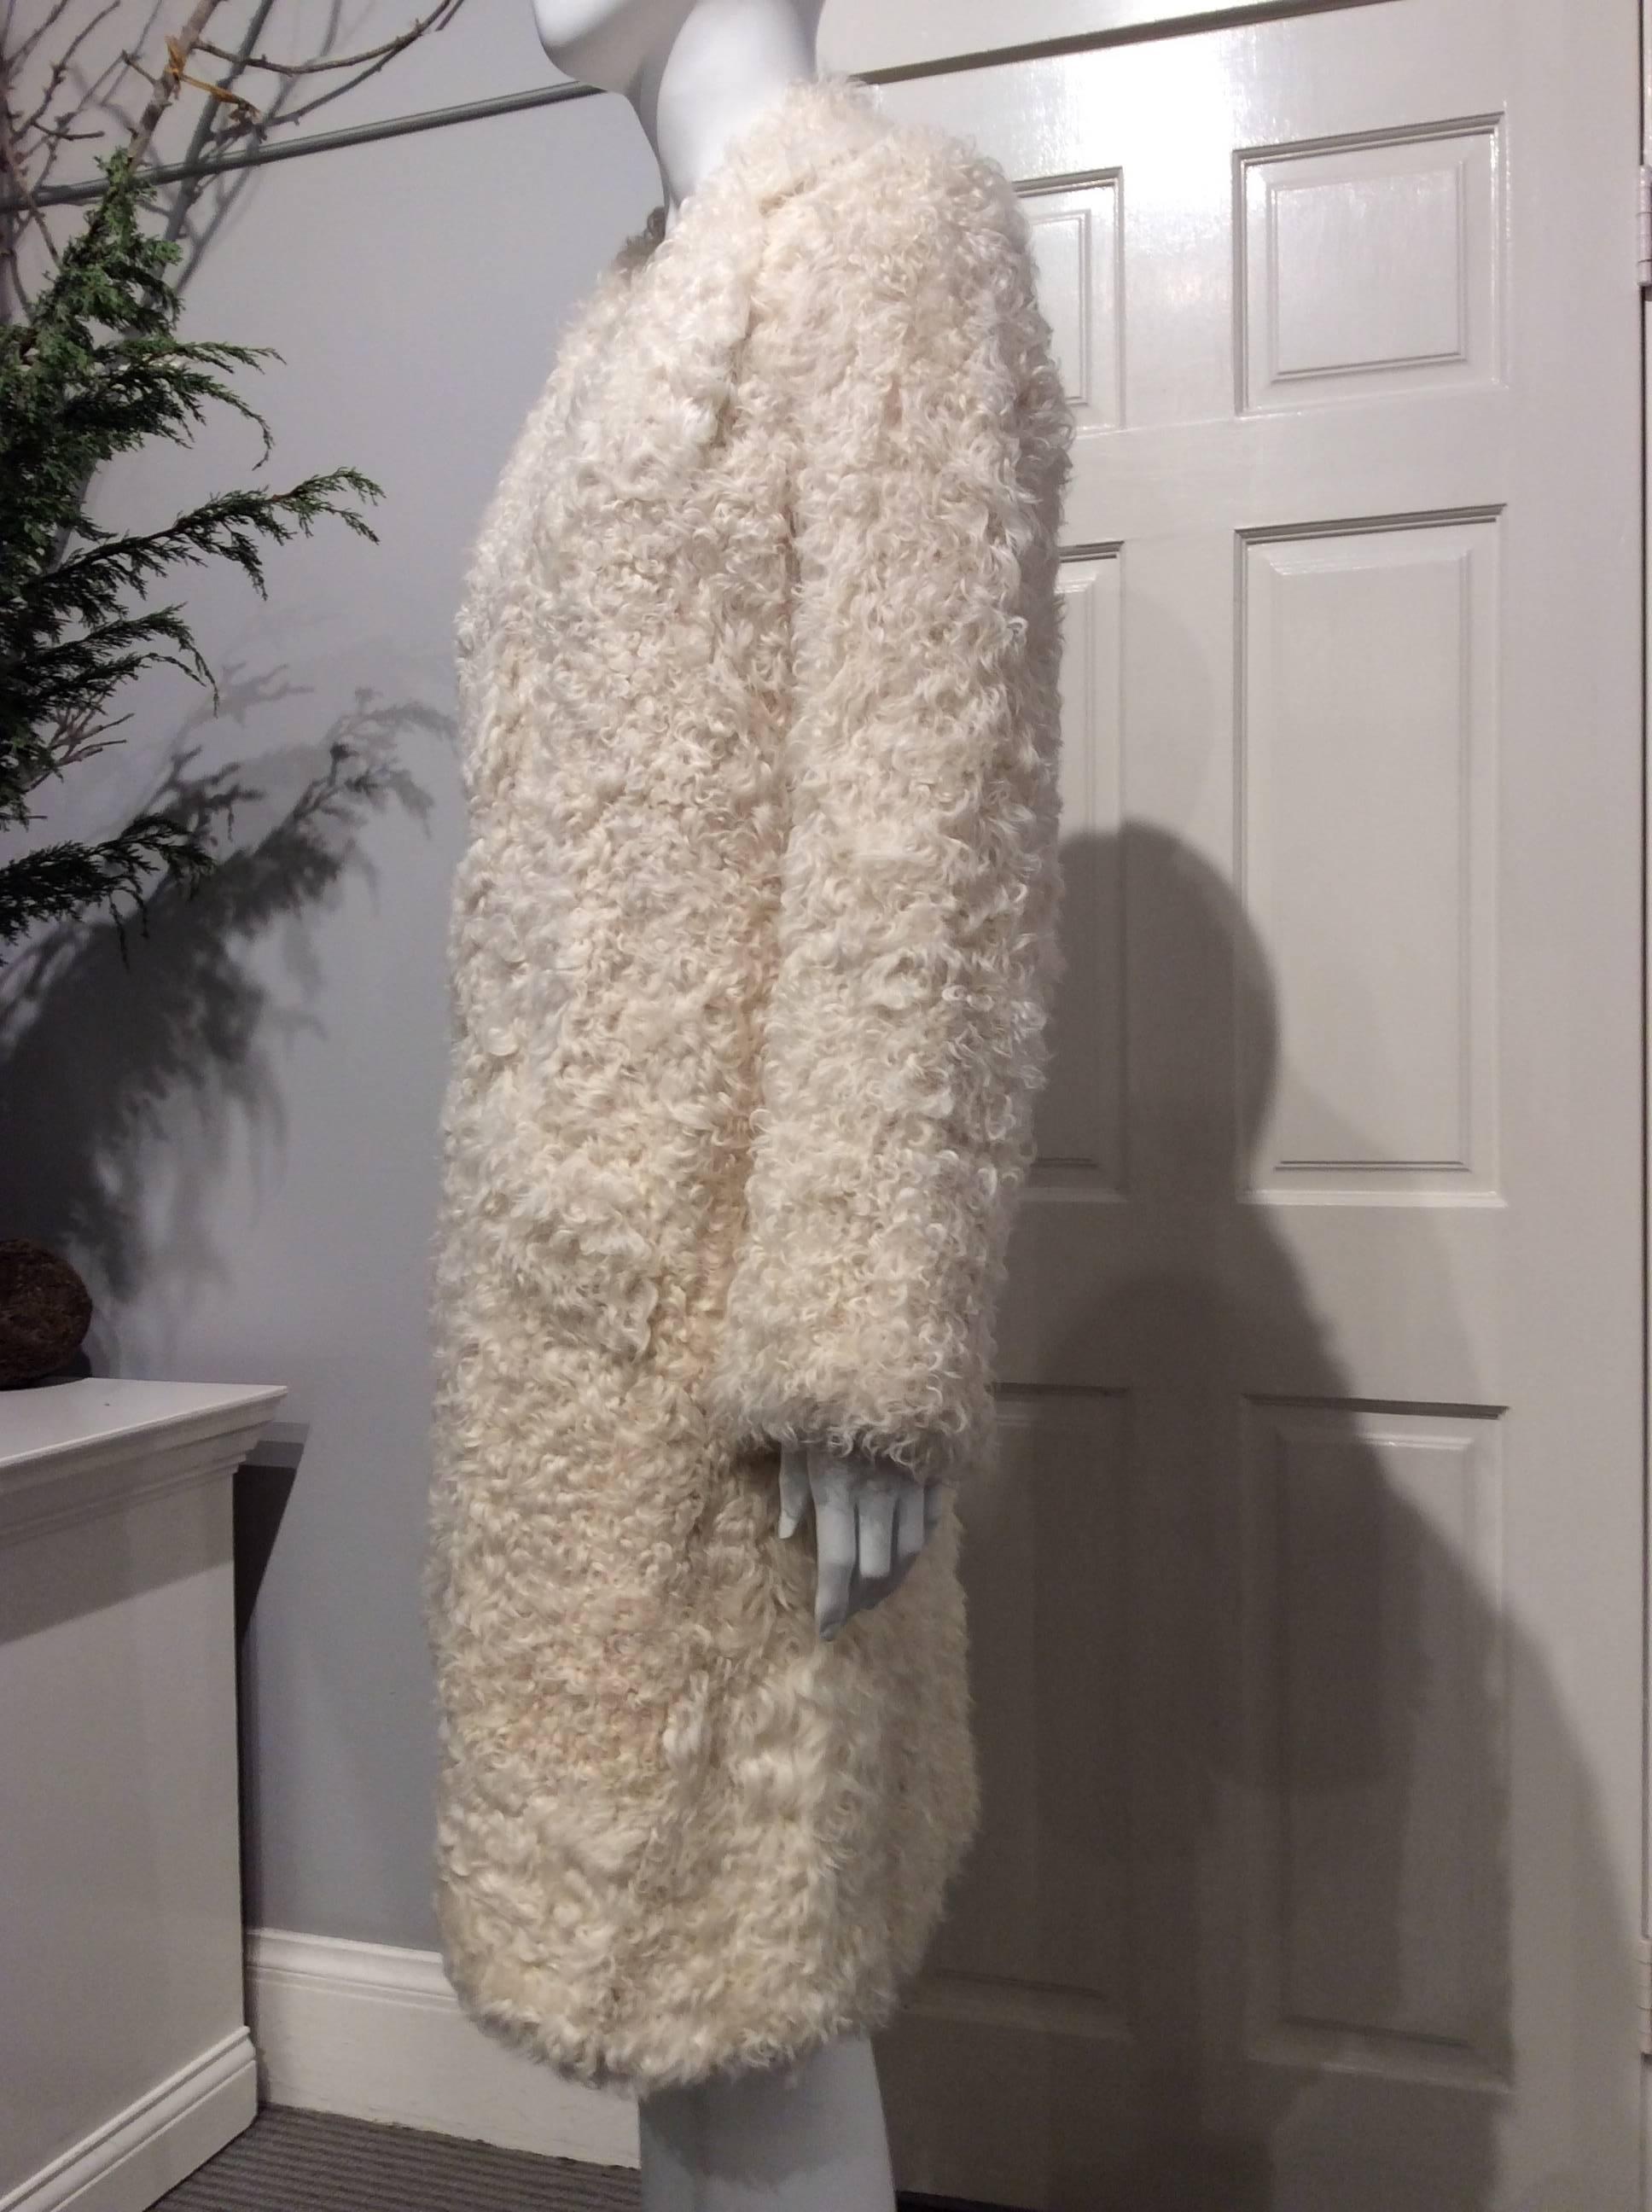 Single breasted coat in ivory curly lamb with twisted collar. It closes with 3 oversized ivory buttons. The coat has two slanted front pockets.